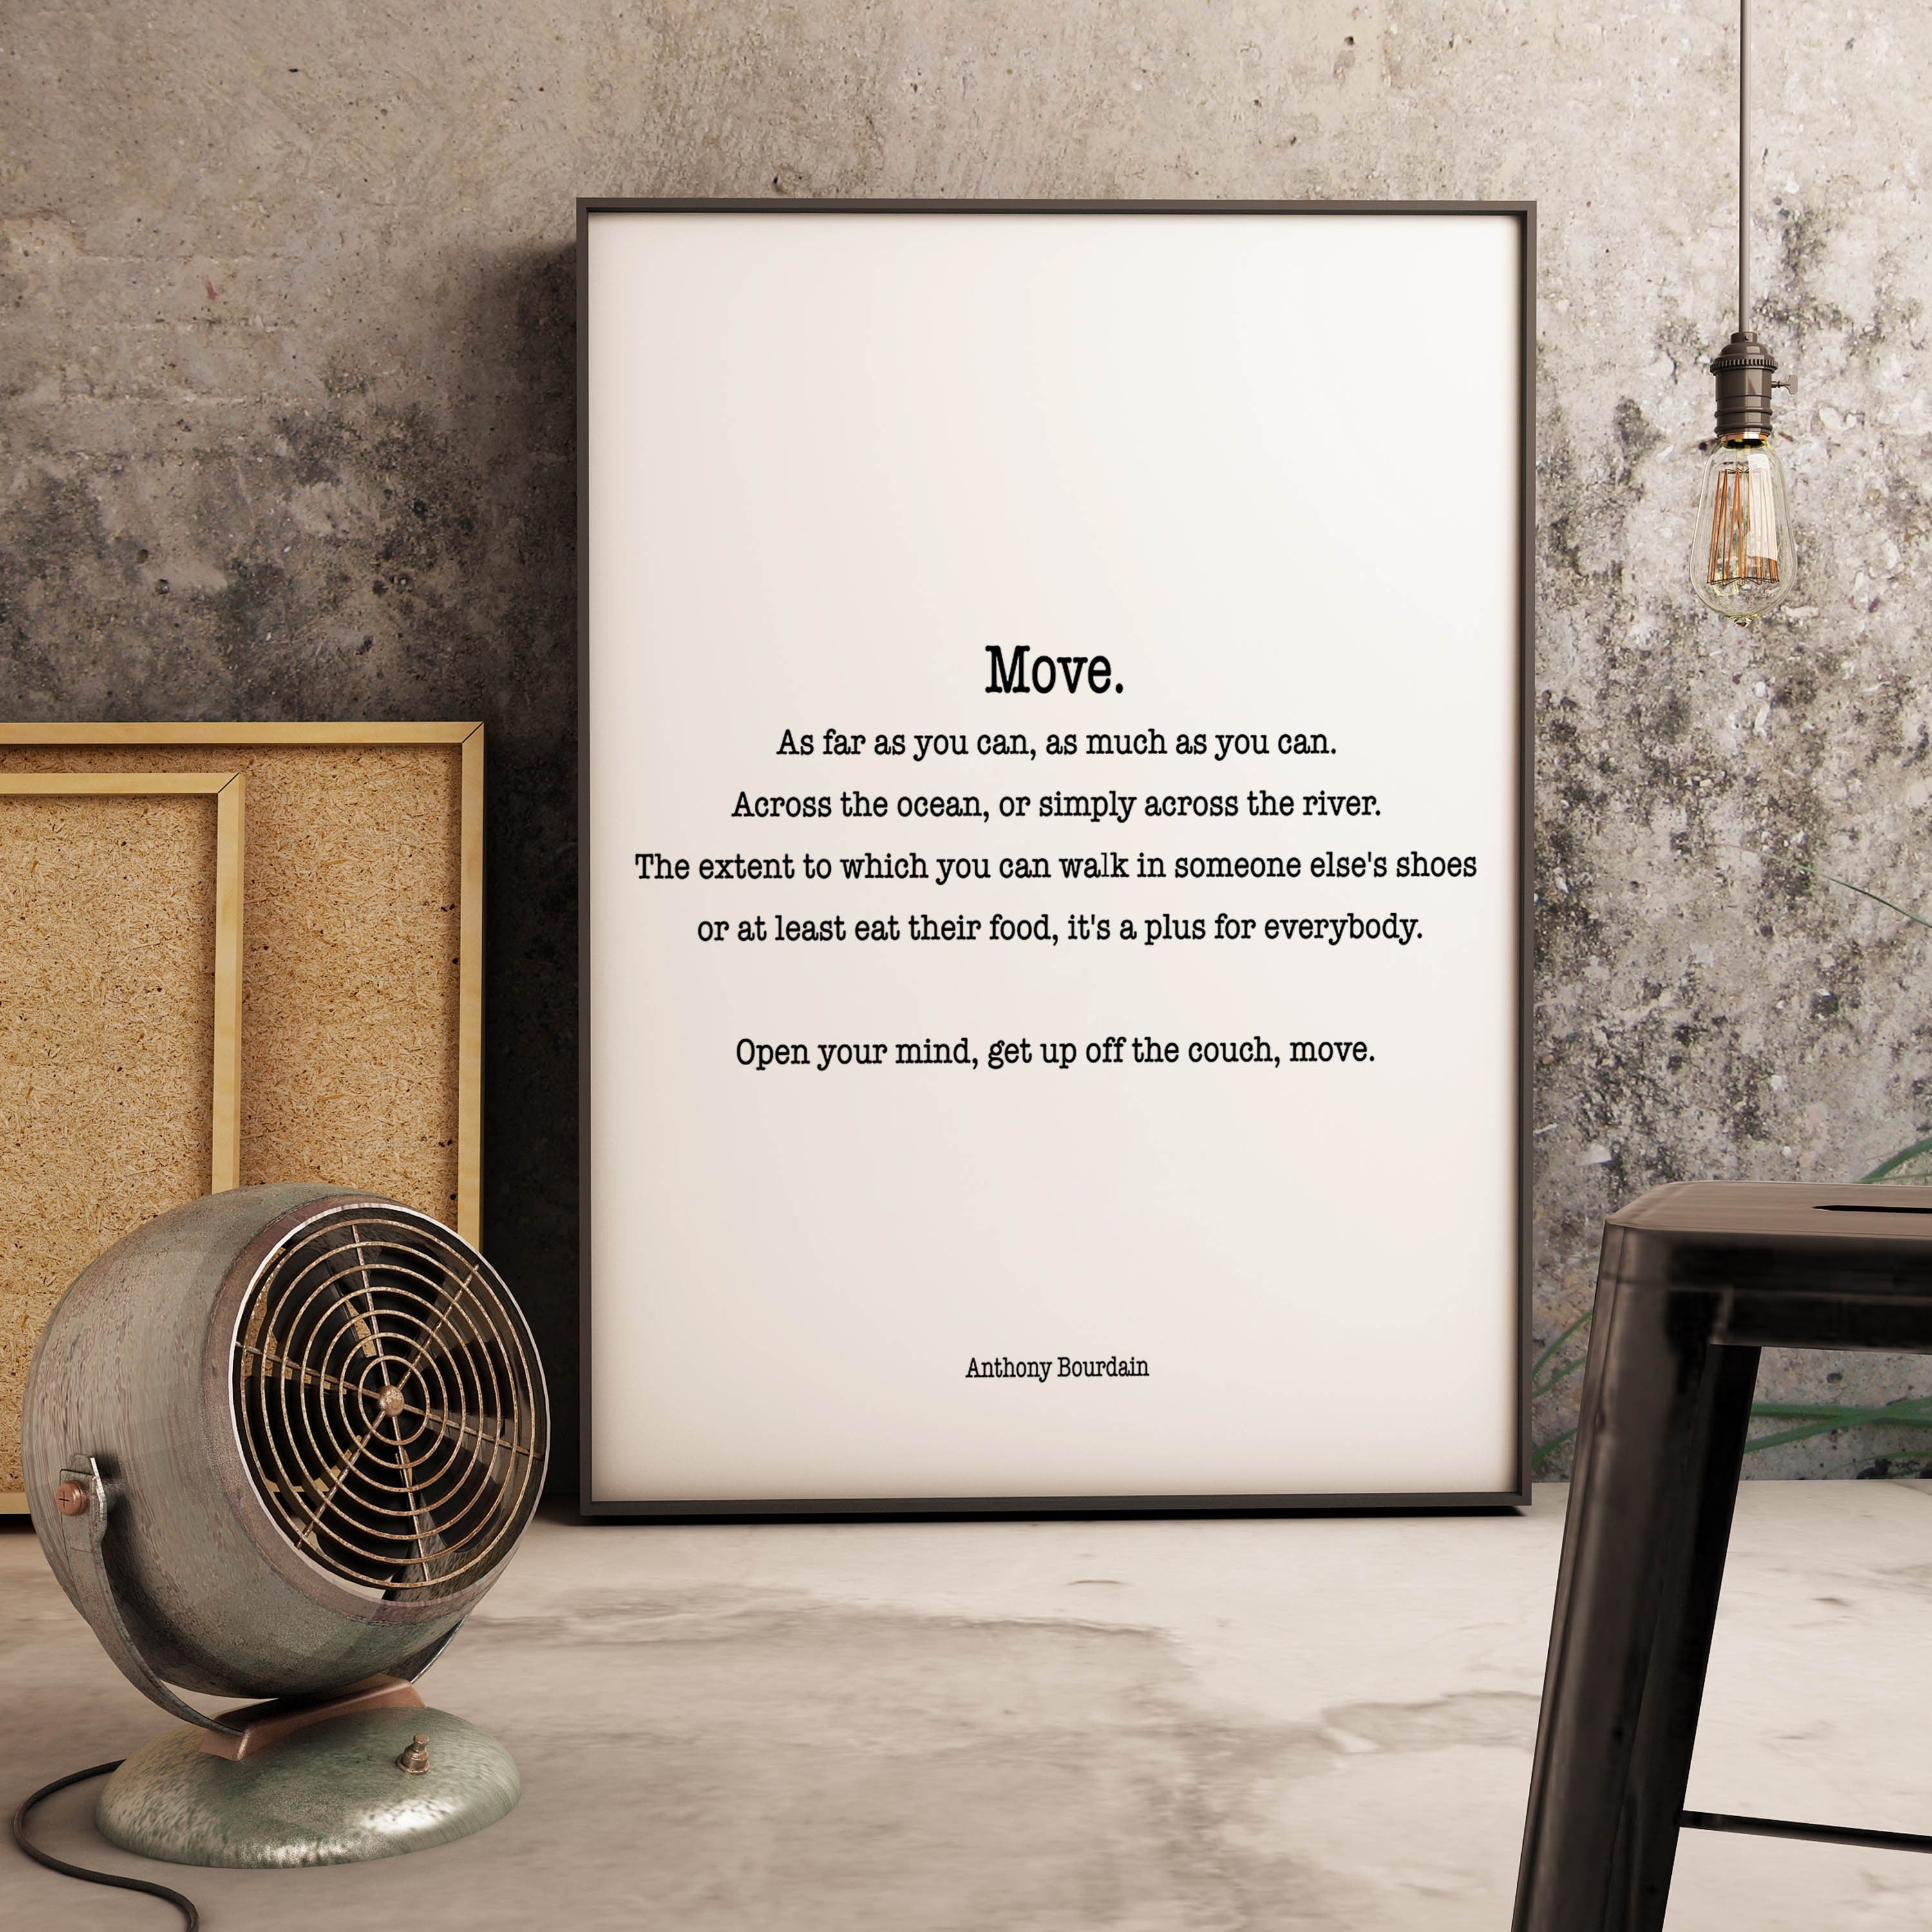 Anthony Bourdain Quote Print, Move. As far as you can